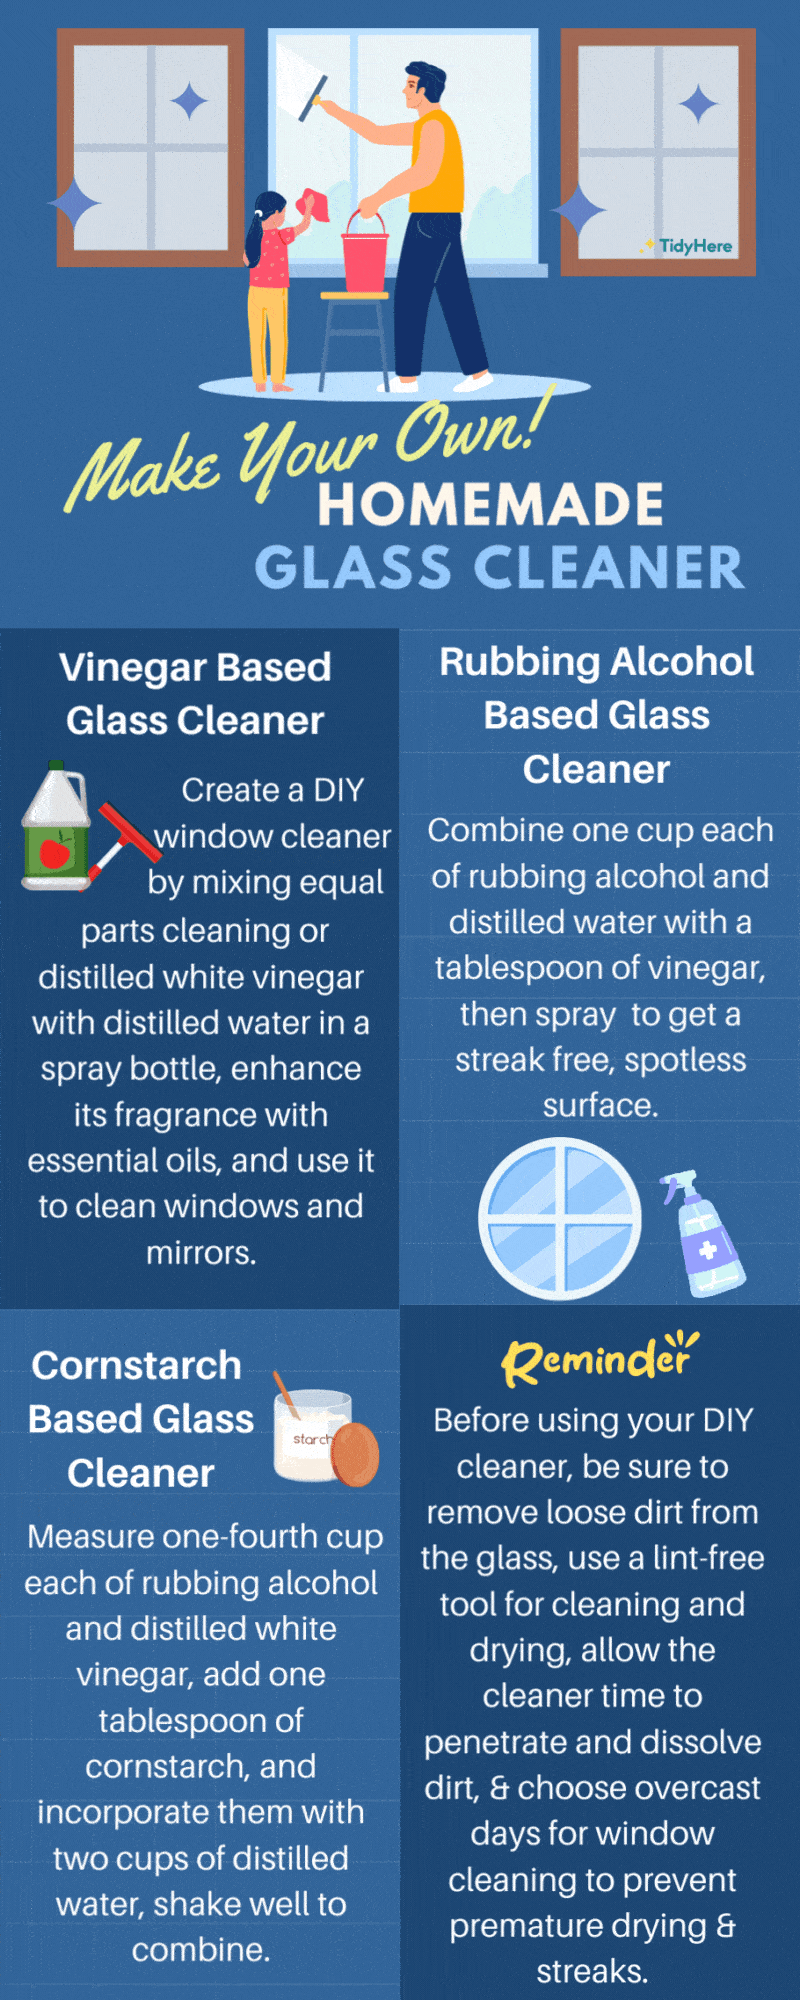 Make Your Own Homemade Glass Cleaner Tidyhere Infographic